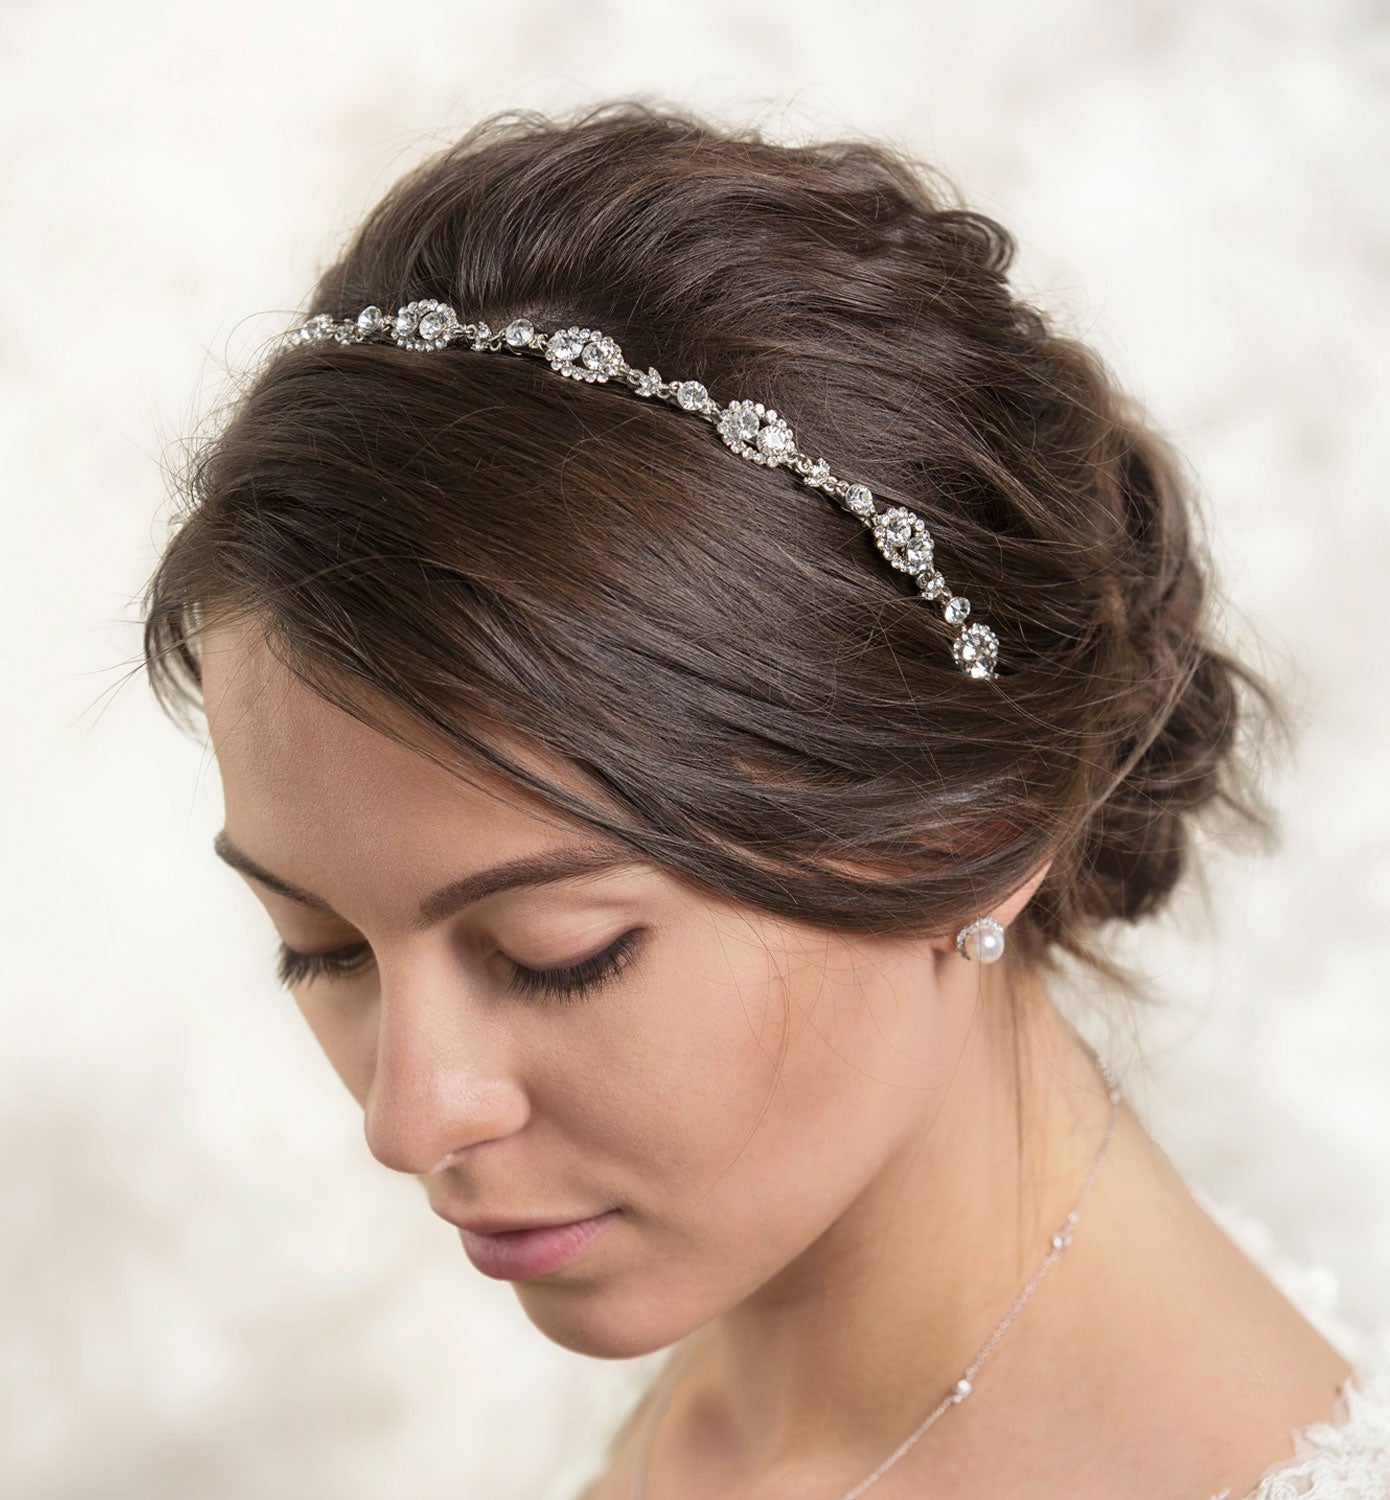 20 best headbands for women for every occasion in 2022